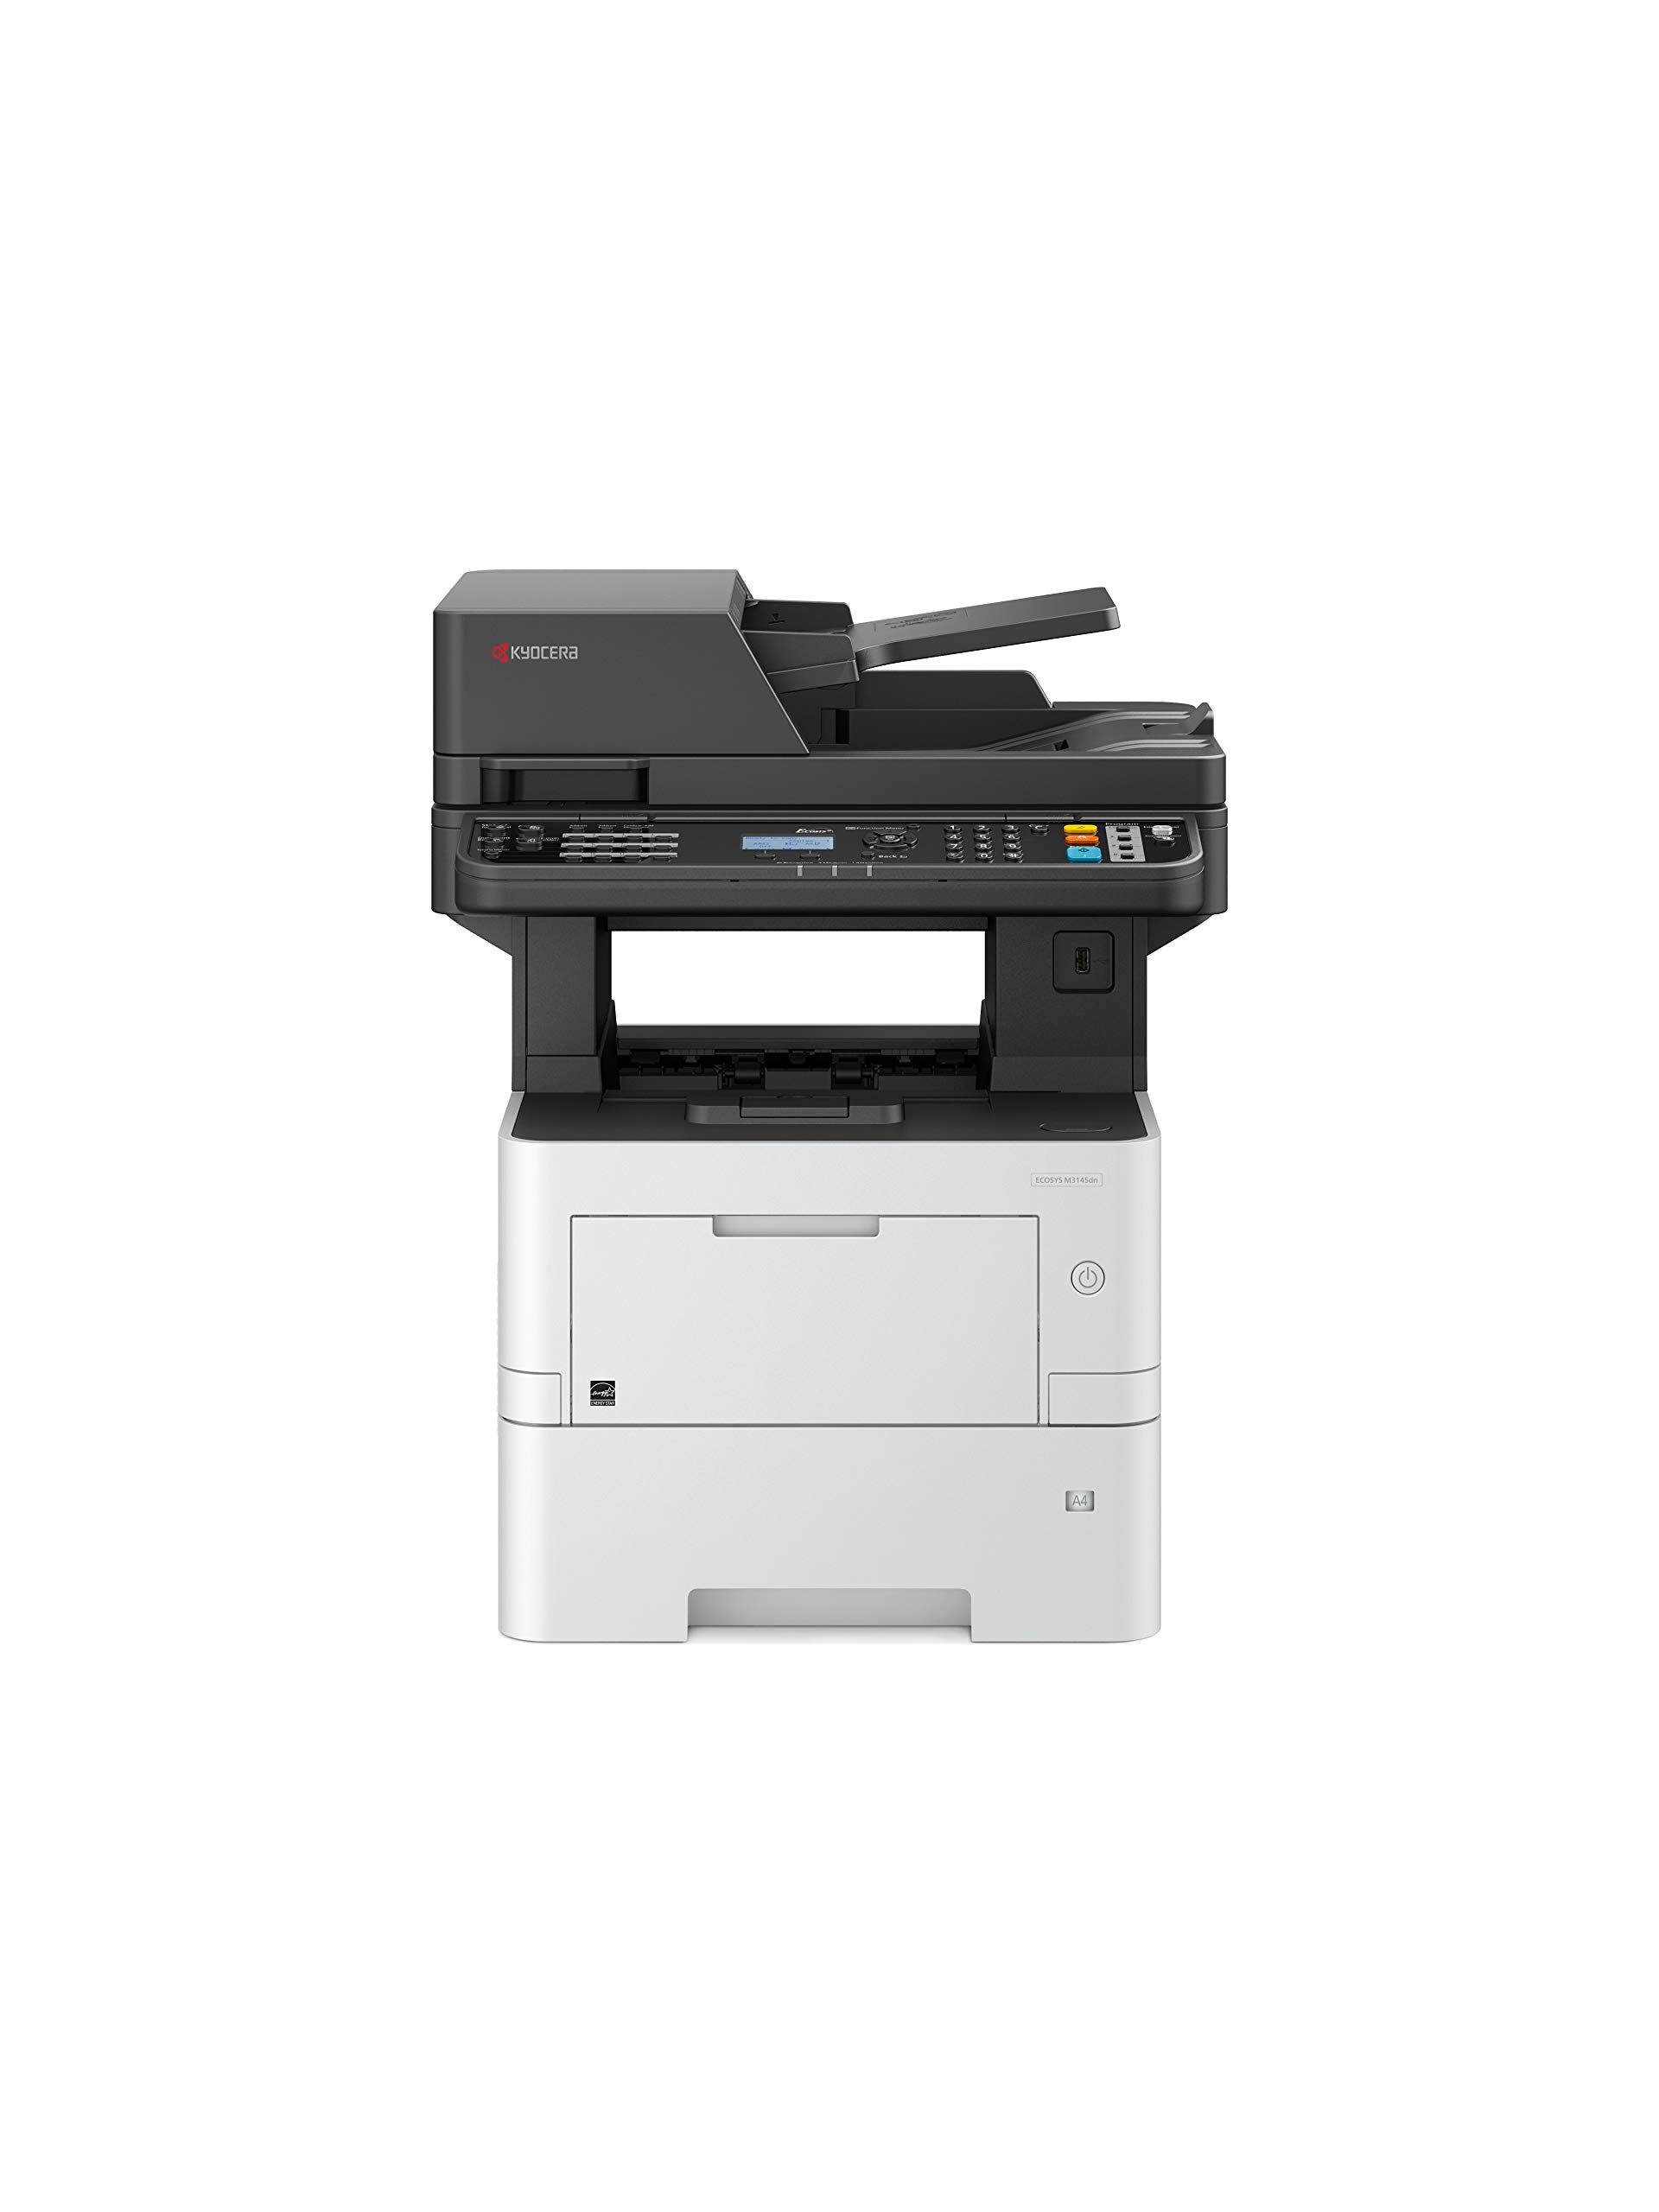 Kyocera Ecosys M3145dn Black/White Multifunction Laser Printer. All-in-one: Copy, Scan, Fax. LCD Screen, 45 Pages/min